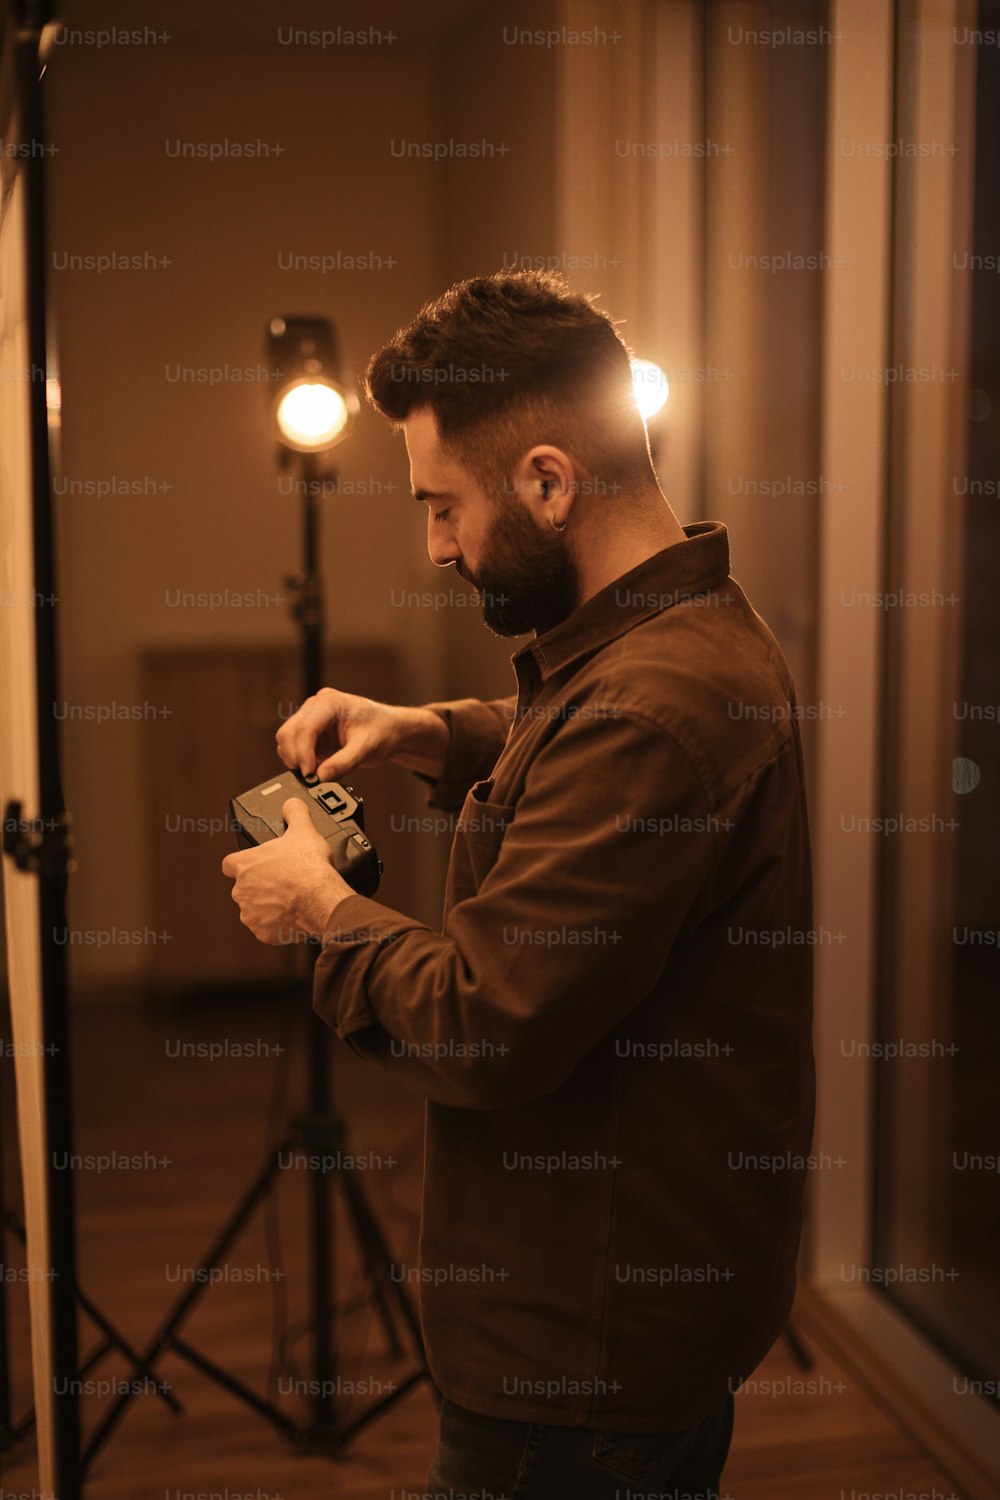 a man standing in a room holding a camera